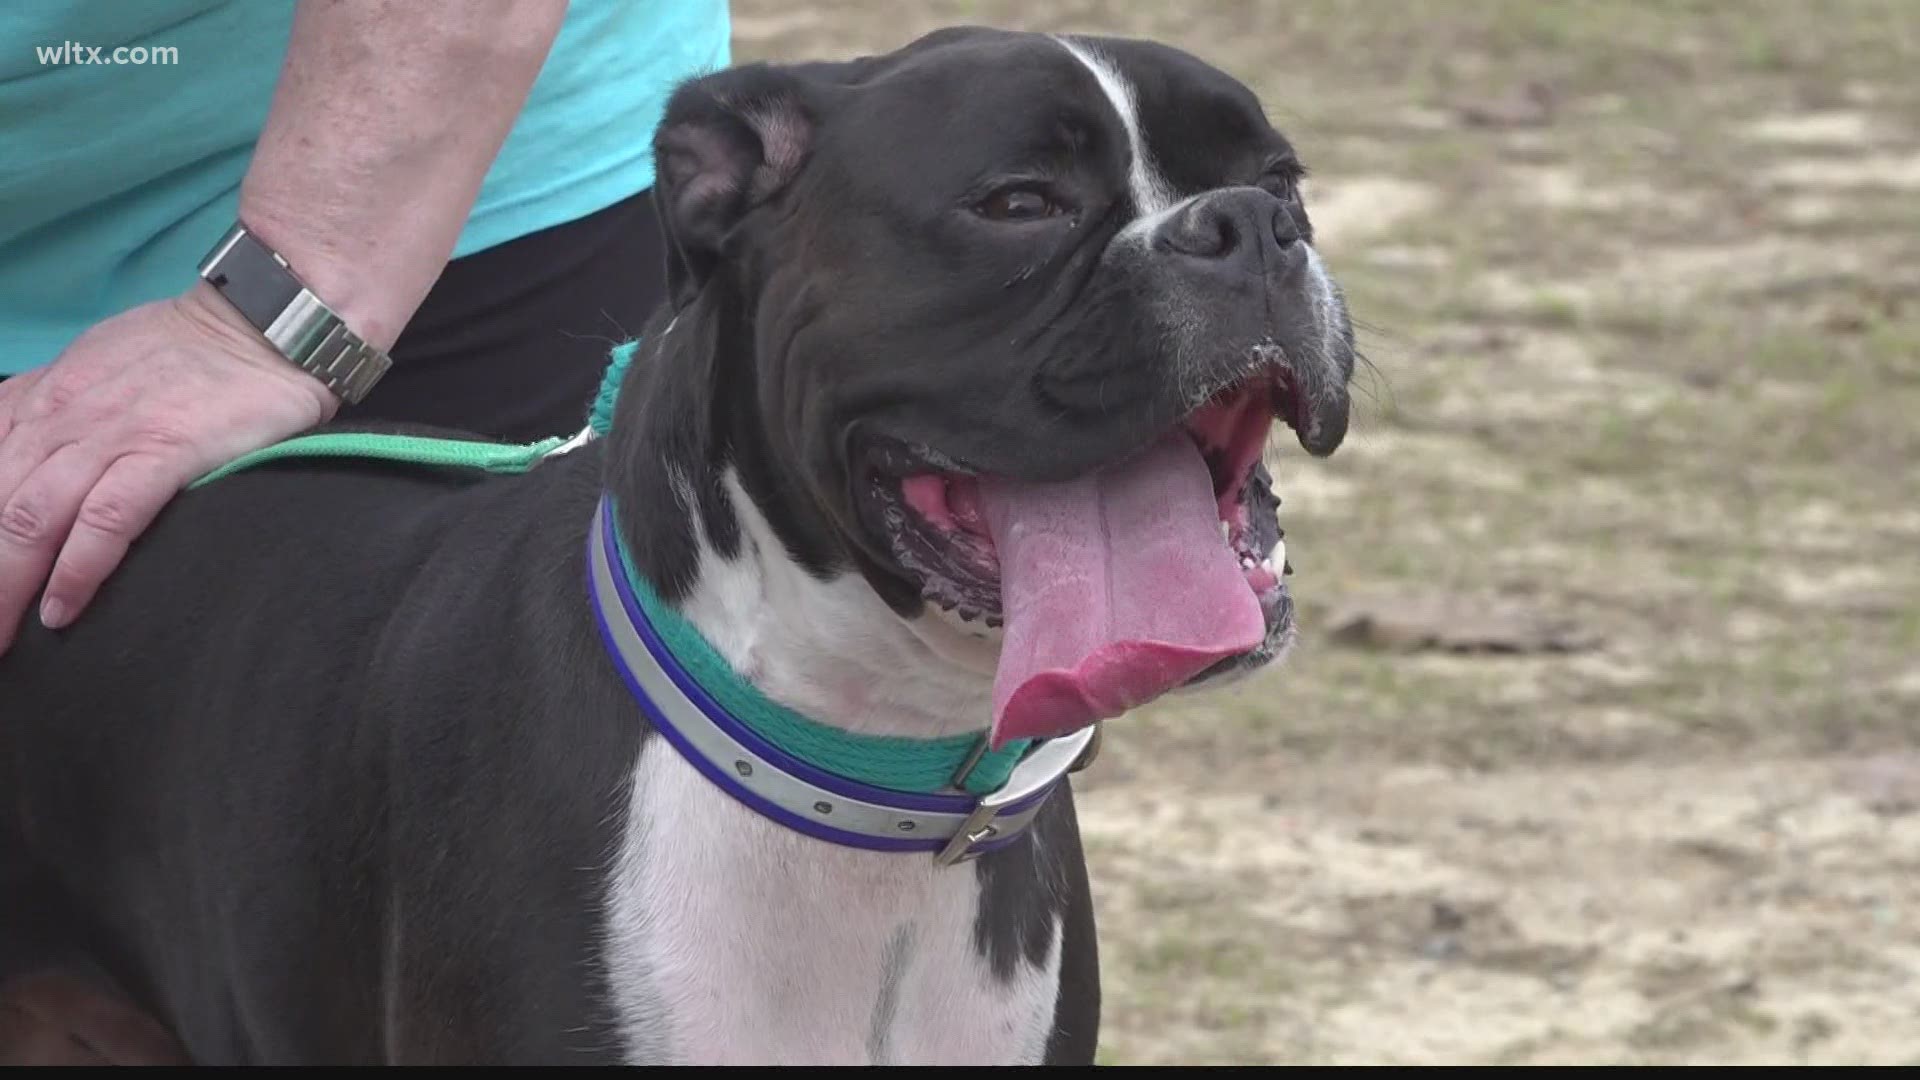 Columbia non-profit, Carolina Boxer Rescue, held a fundraiser Saturday to raise money for medical bills. Funds will help them save more foster dogs in need.